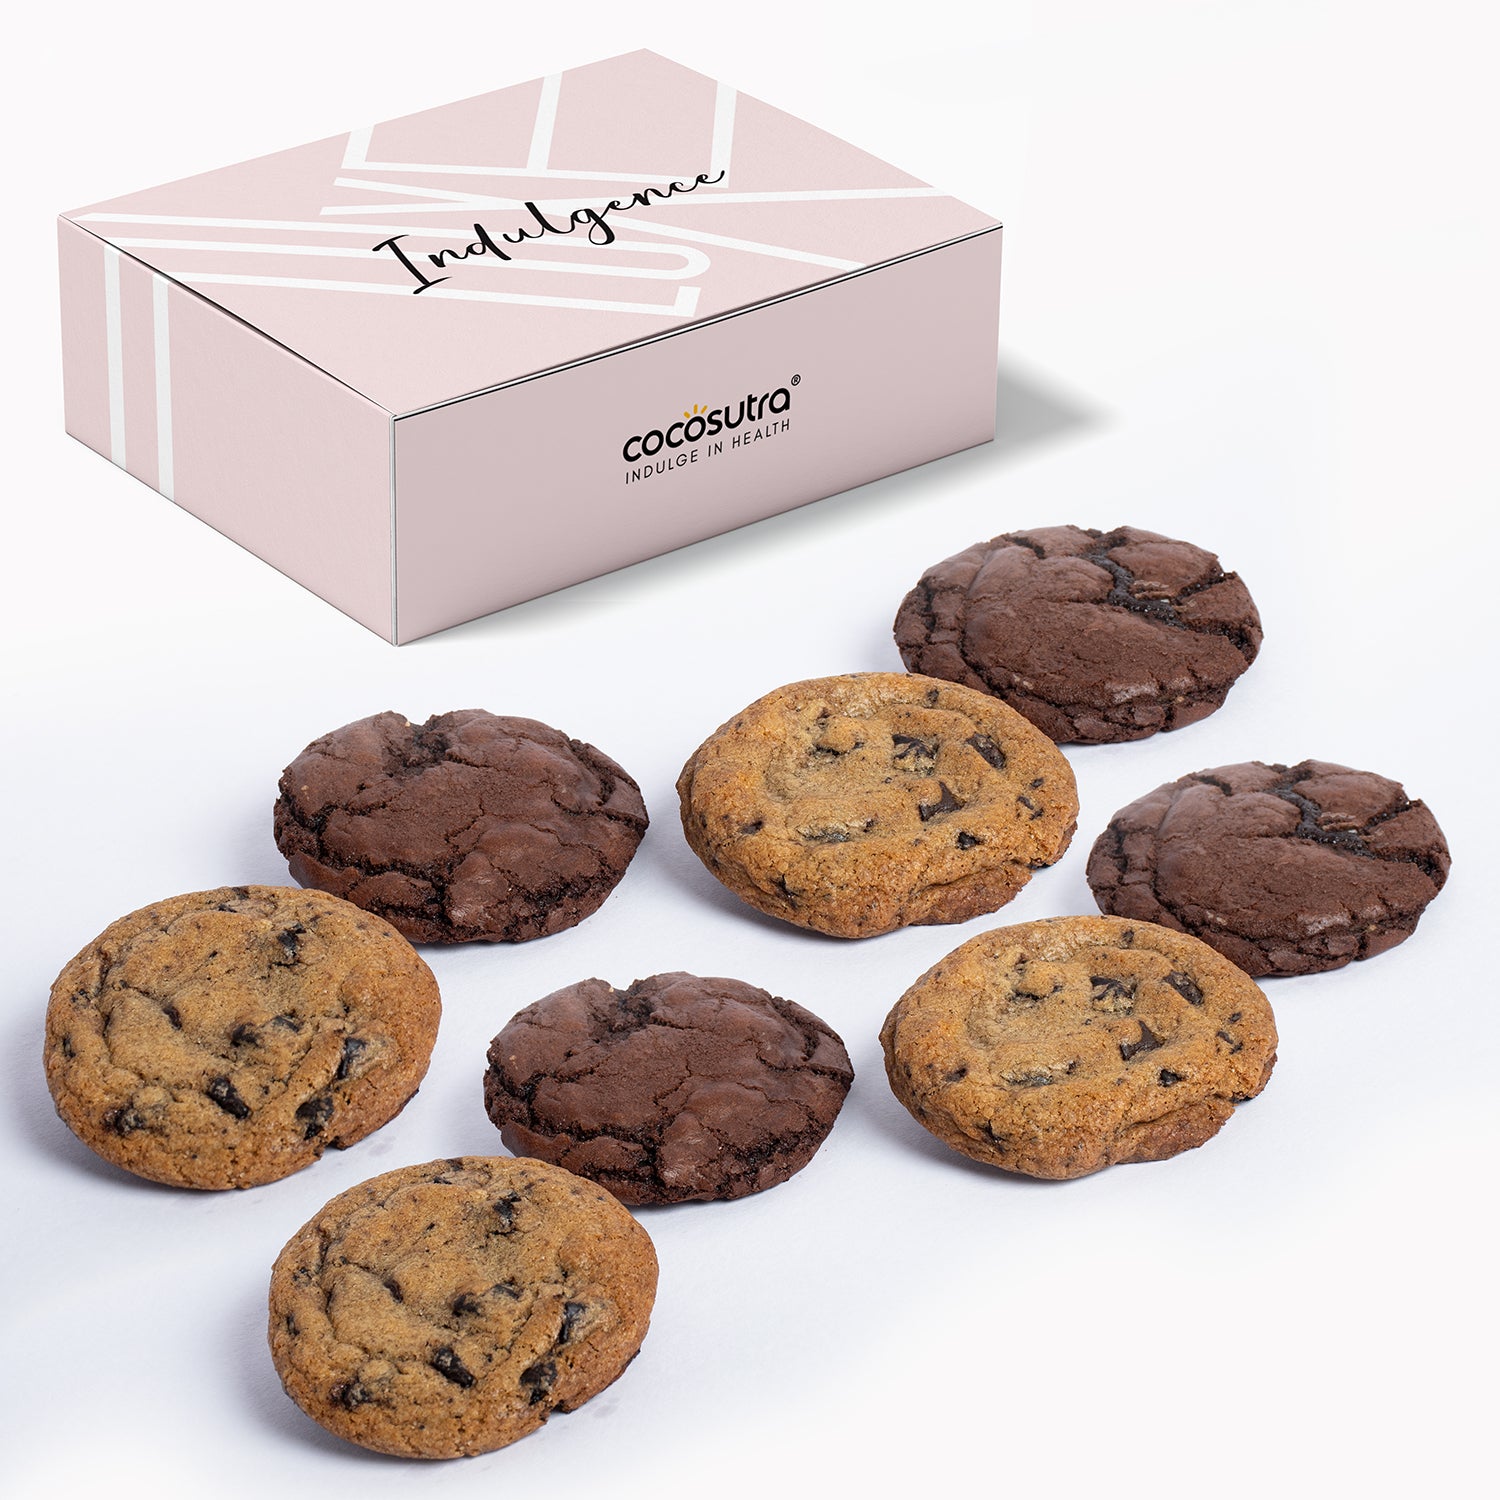 Cocosutra Chunky Chocolate Chip & Fudgy Brownie Cookies - Box of 8 - Eggless